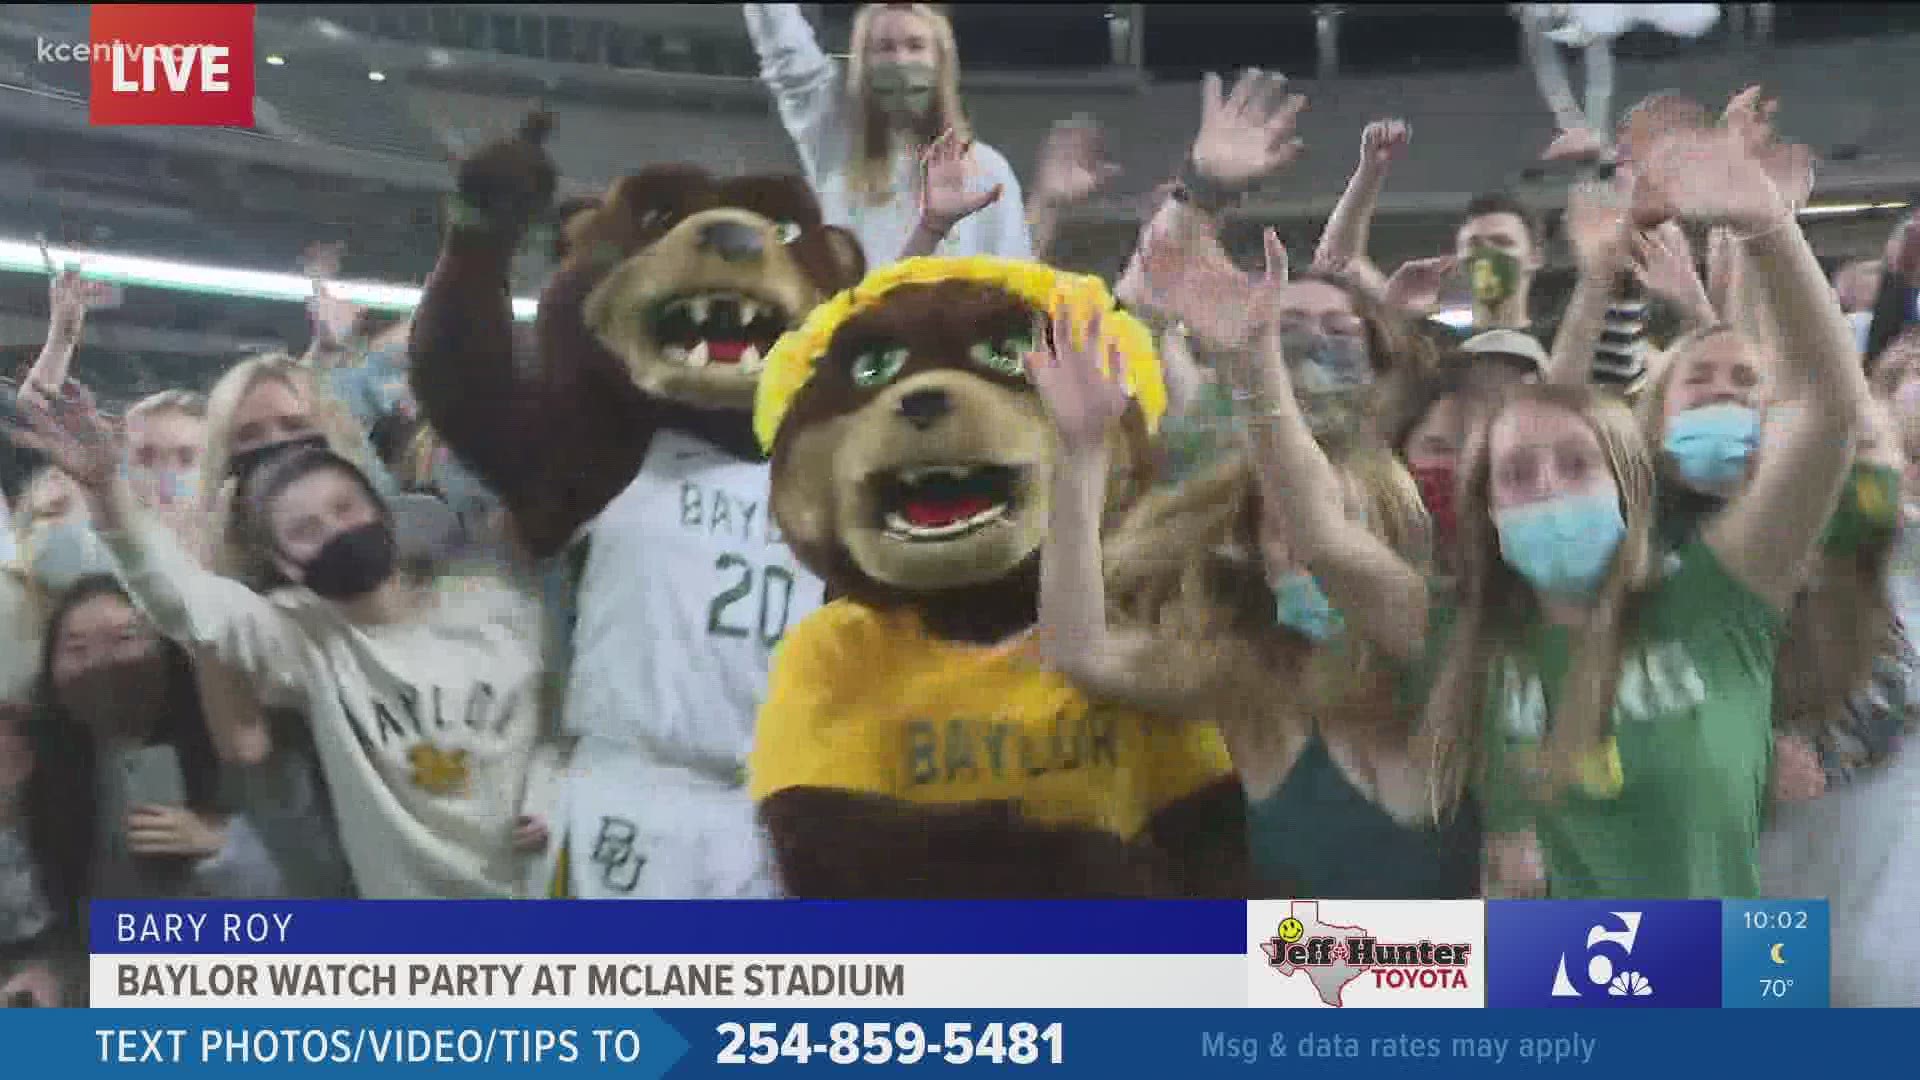 The atmosphere was electric as Baylor fans cheered on their team and their win against Gonzaga.